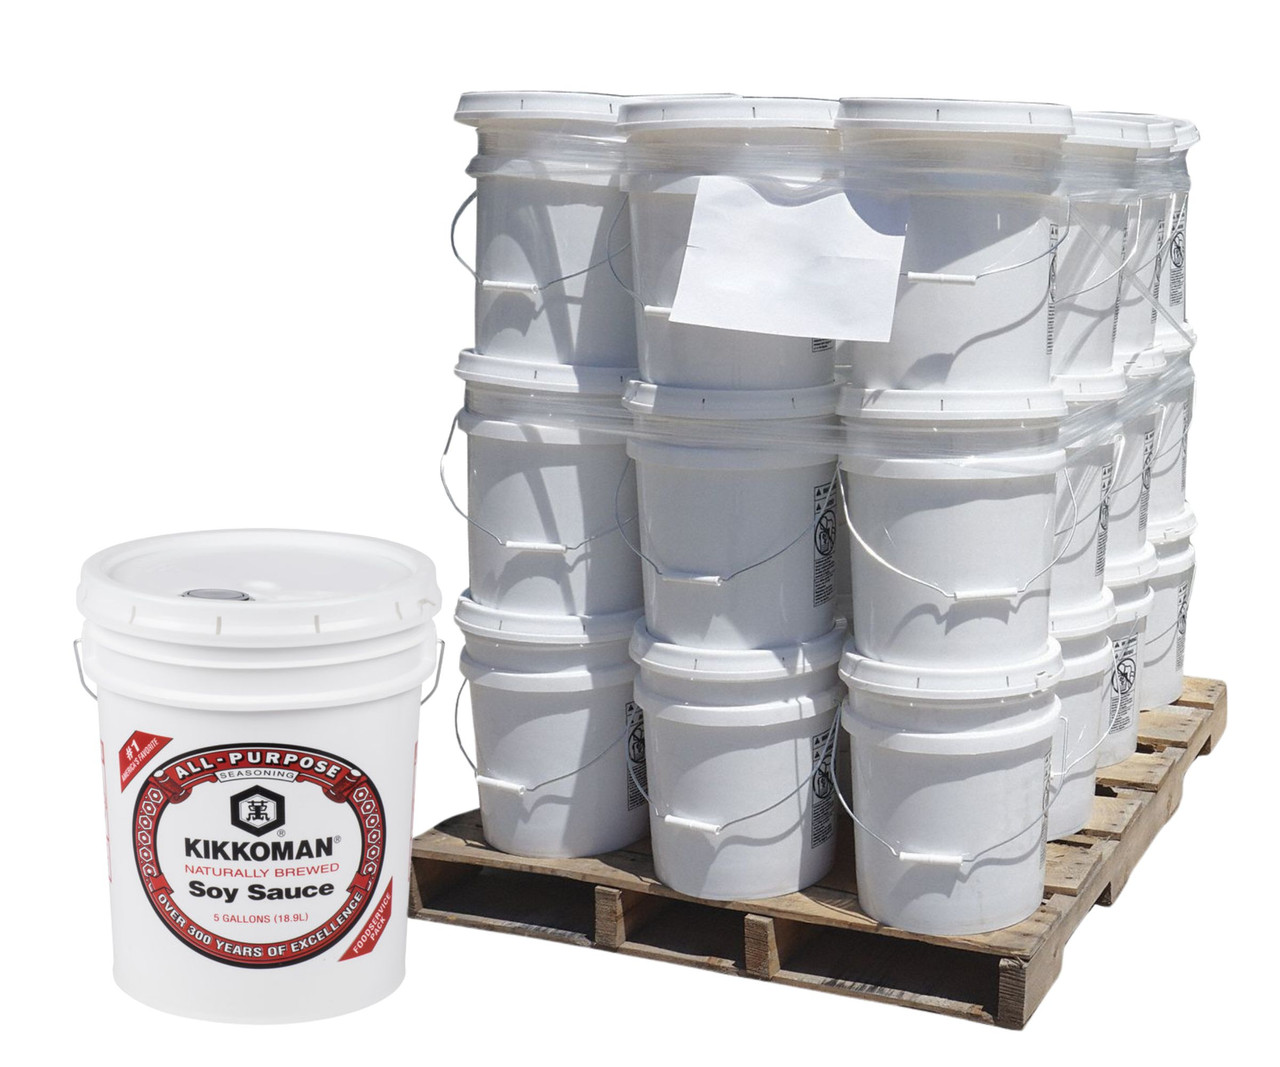 Kikkoman Traditionally Brewed Soy Sauce - 5 Gallon Pail Bulk Food Service I Pallet of 36 I Total 72 Gallons - Chicken Pieces